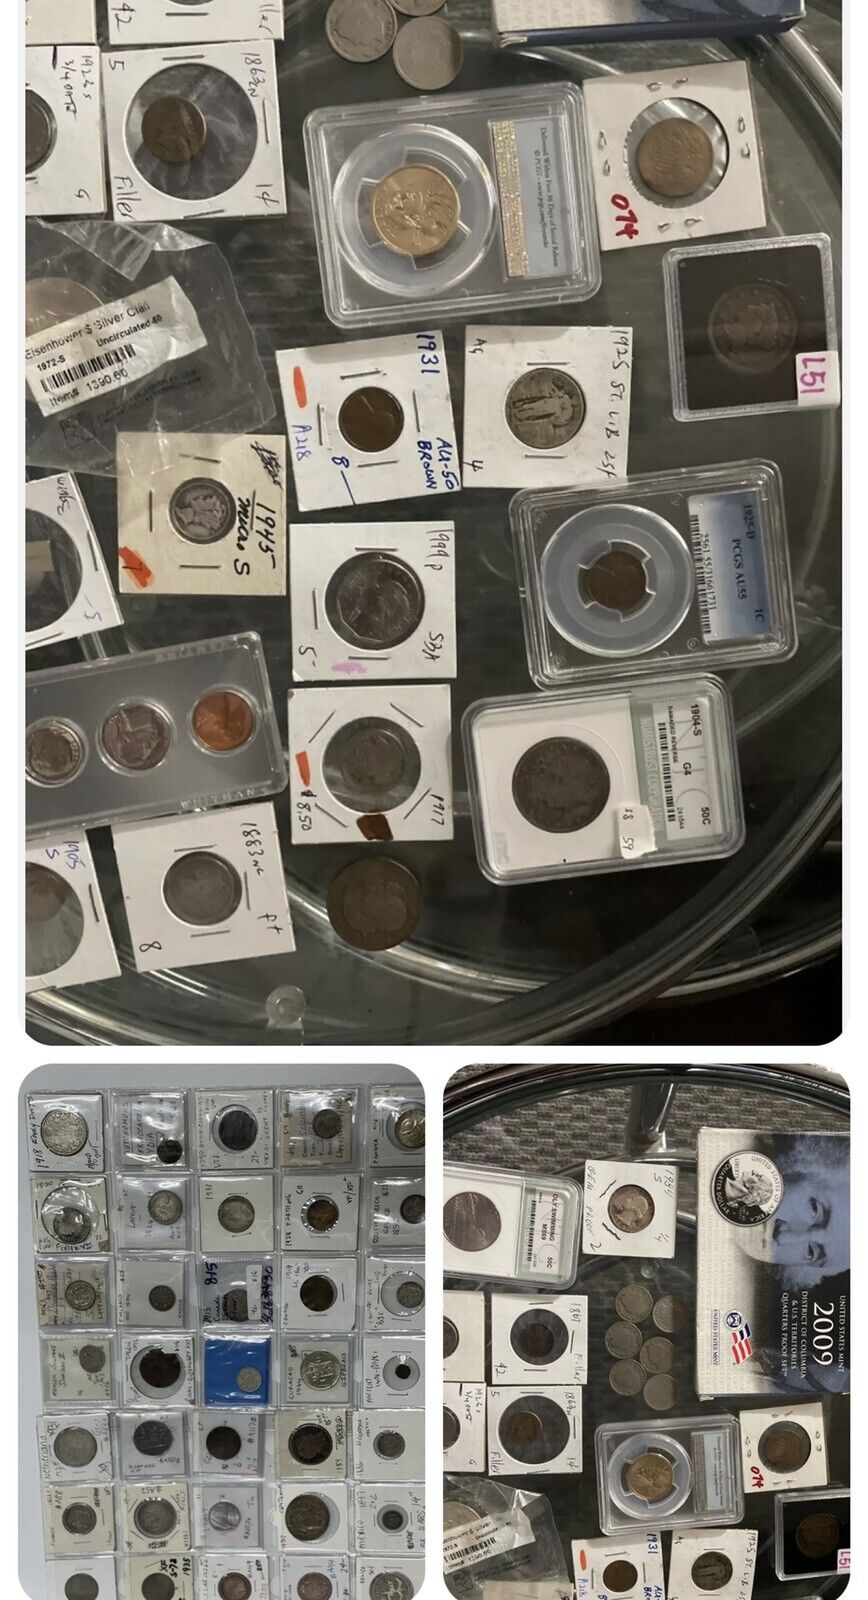 “Ran-dime” silver lot Face Value 50 cents. all coins  60 years old! Free S&H #C2